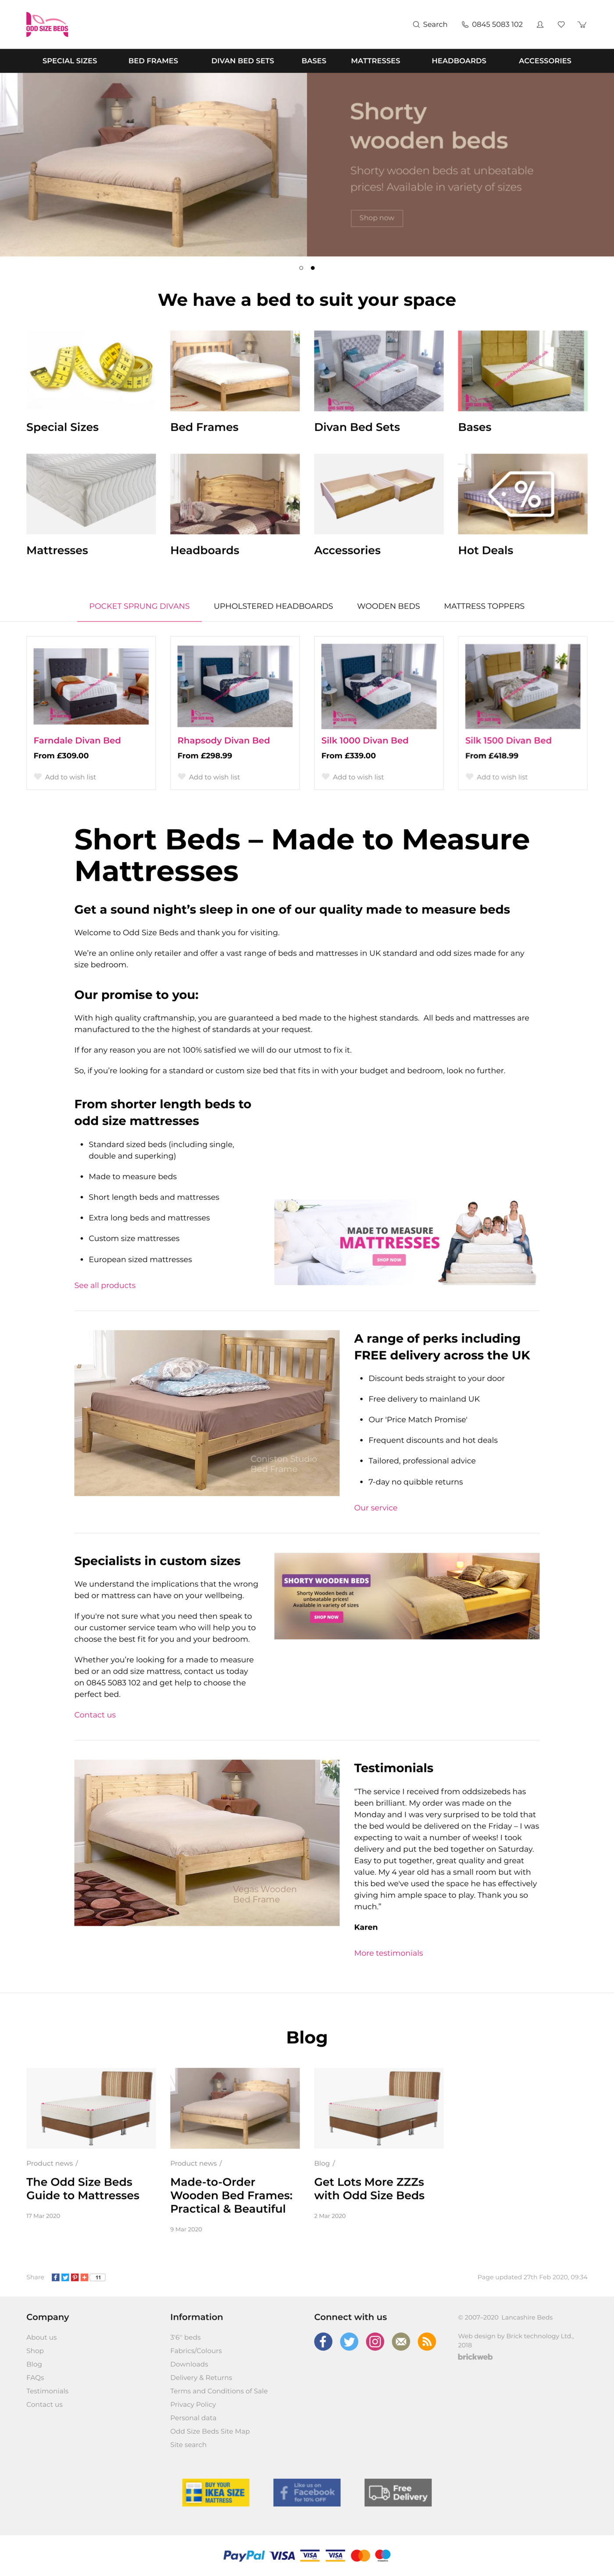 Odd Size Beds Home page